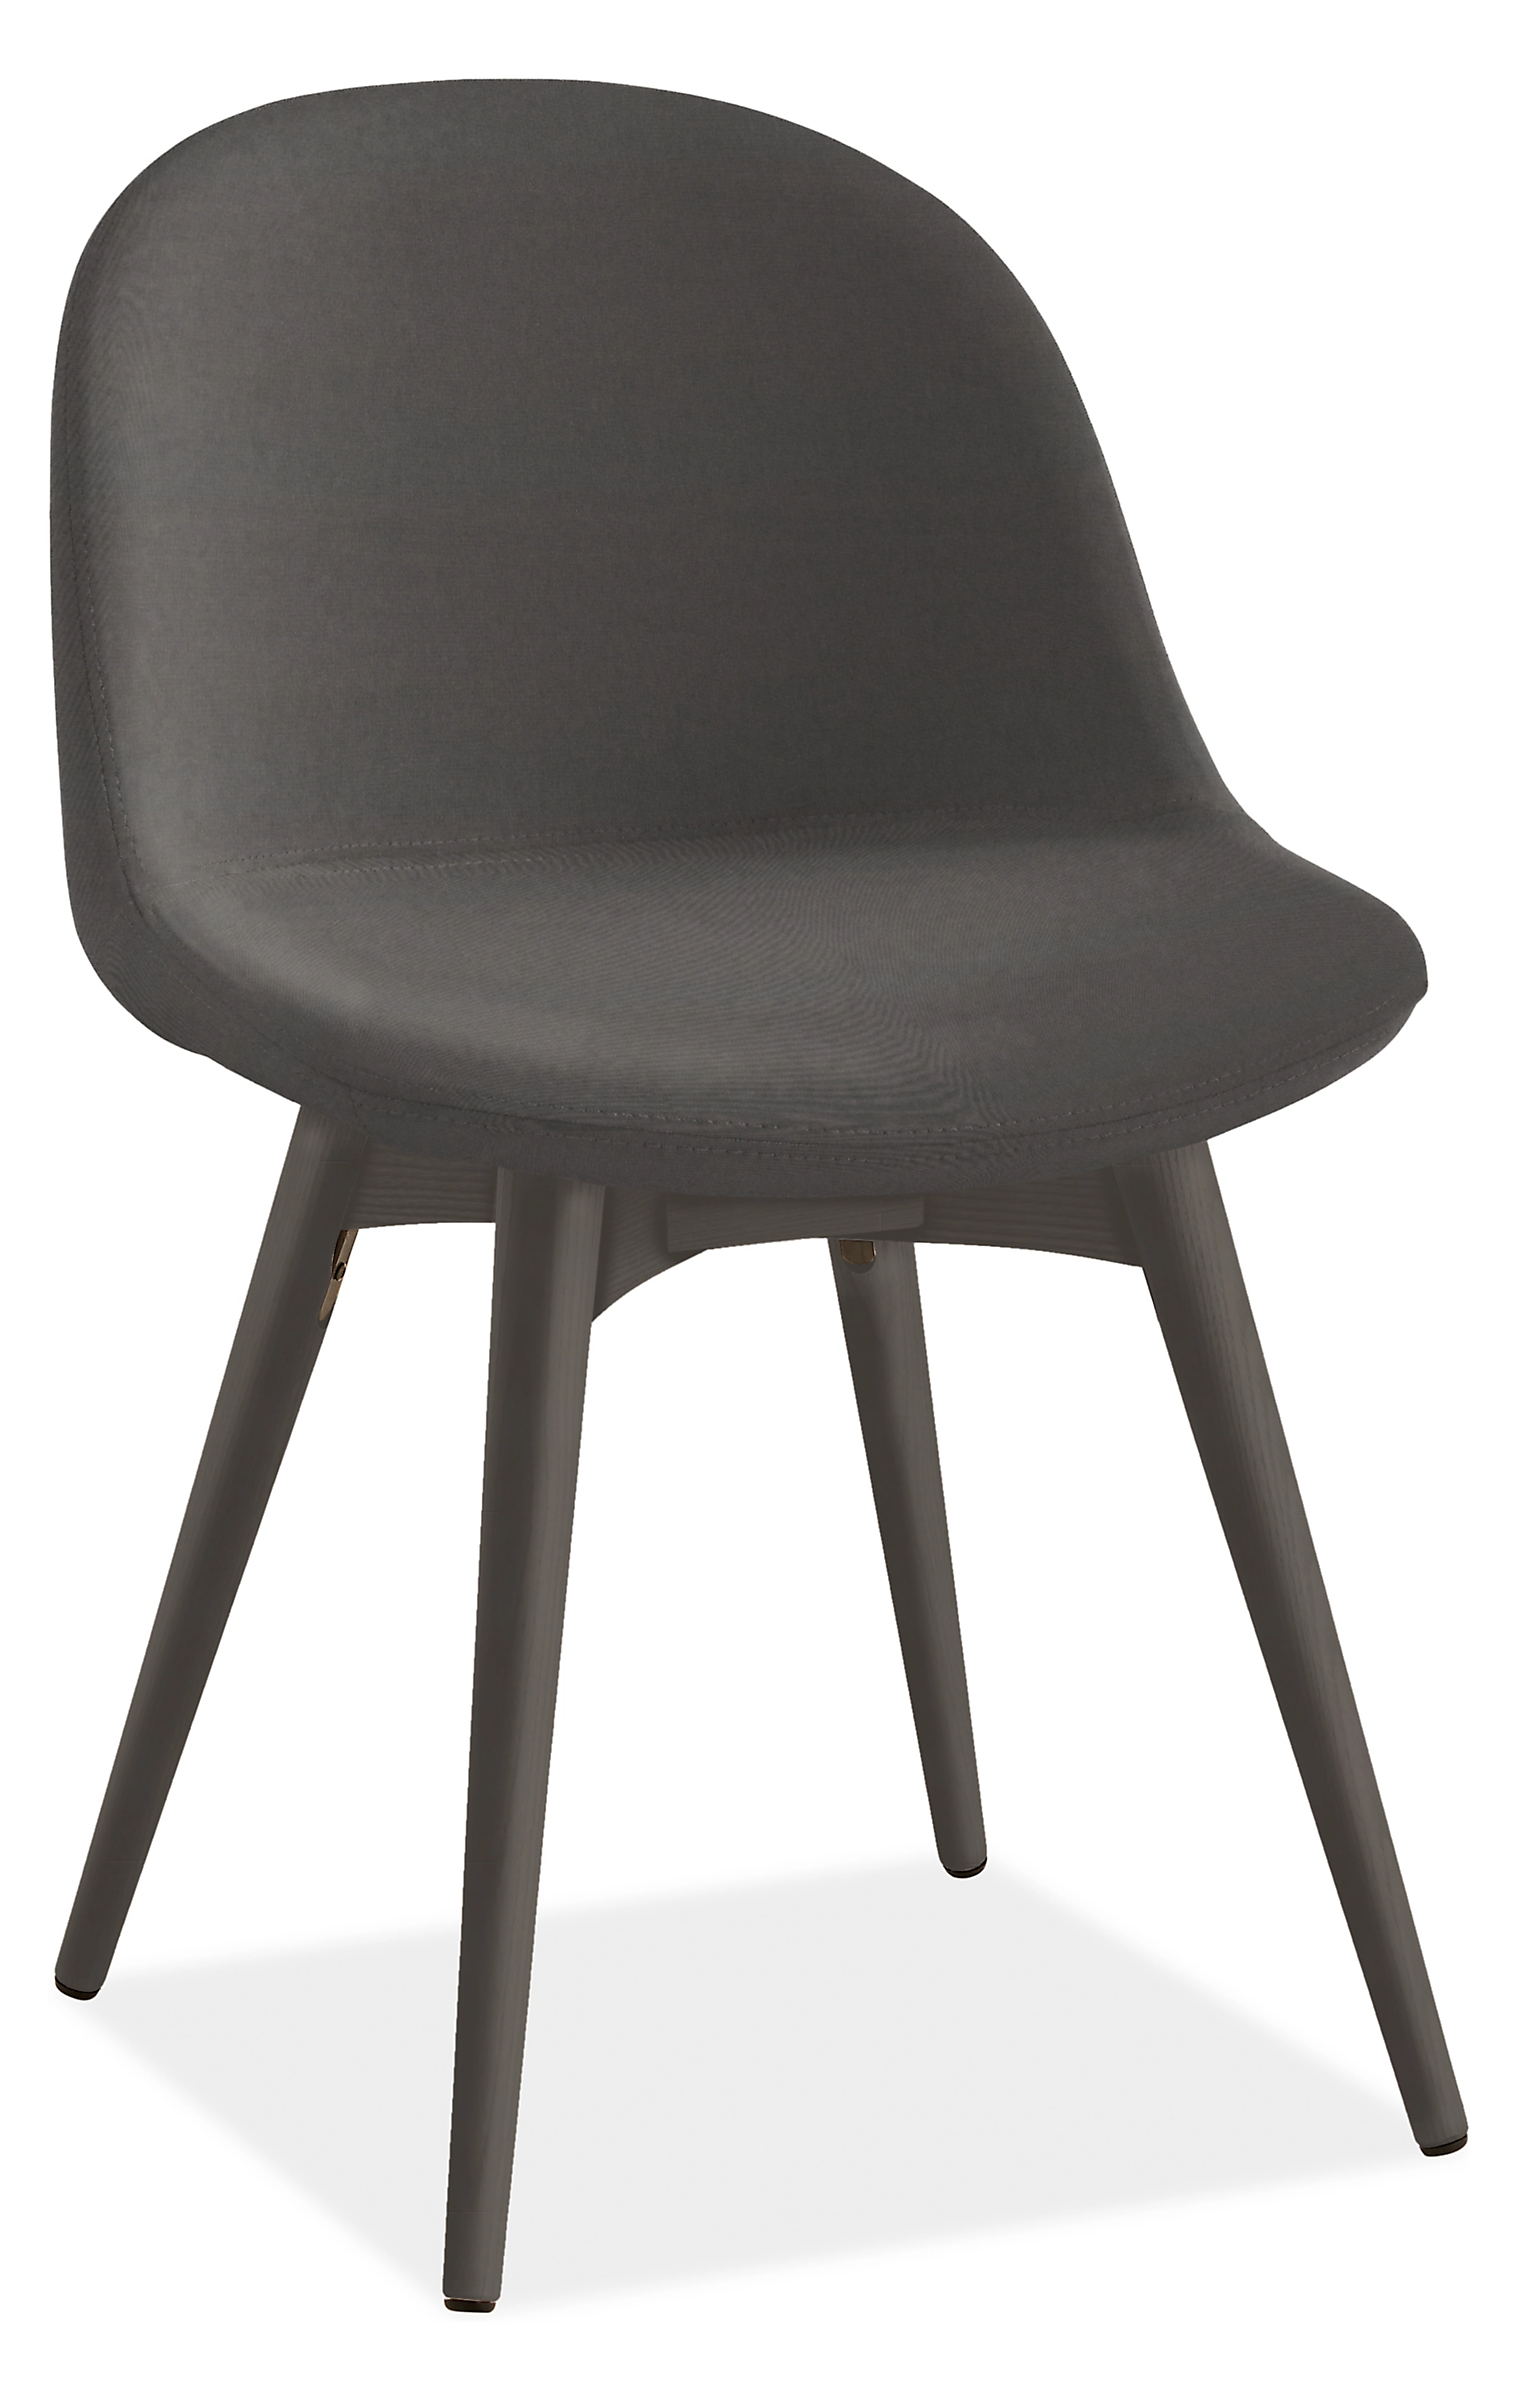 Bernard Dining Chair in Creel Charcoal Fabric with Ebony Wood Legs